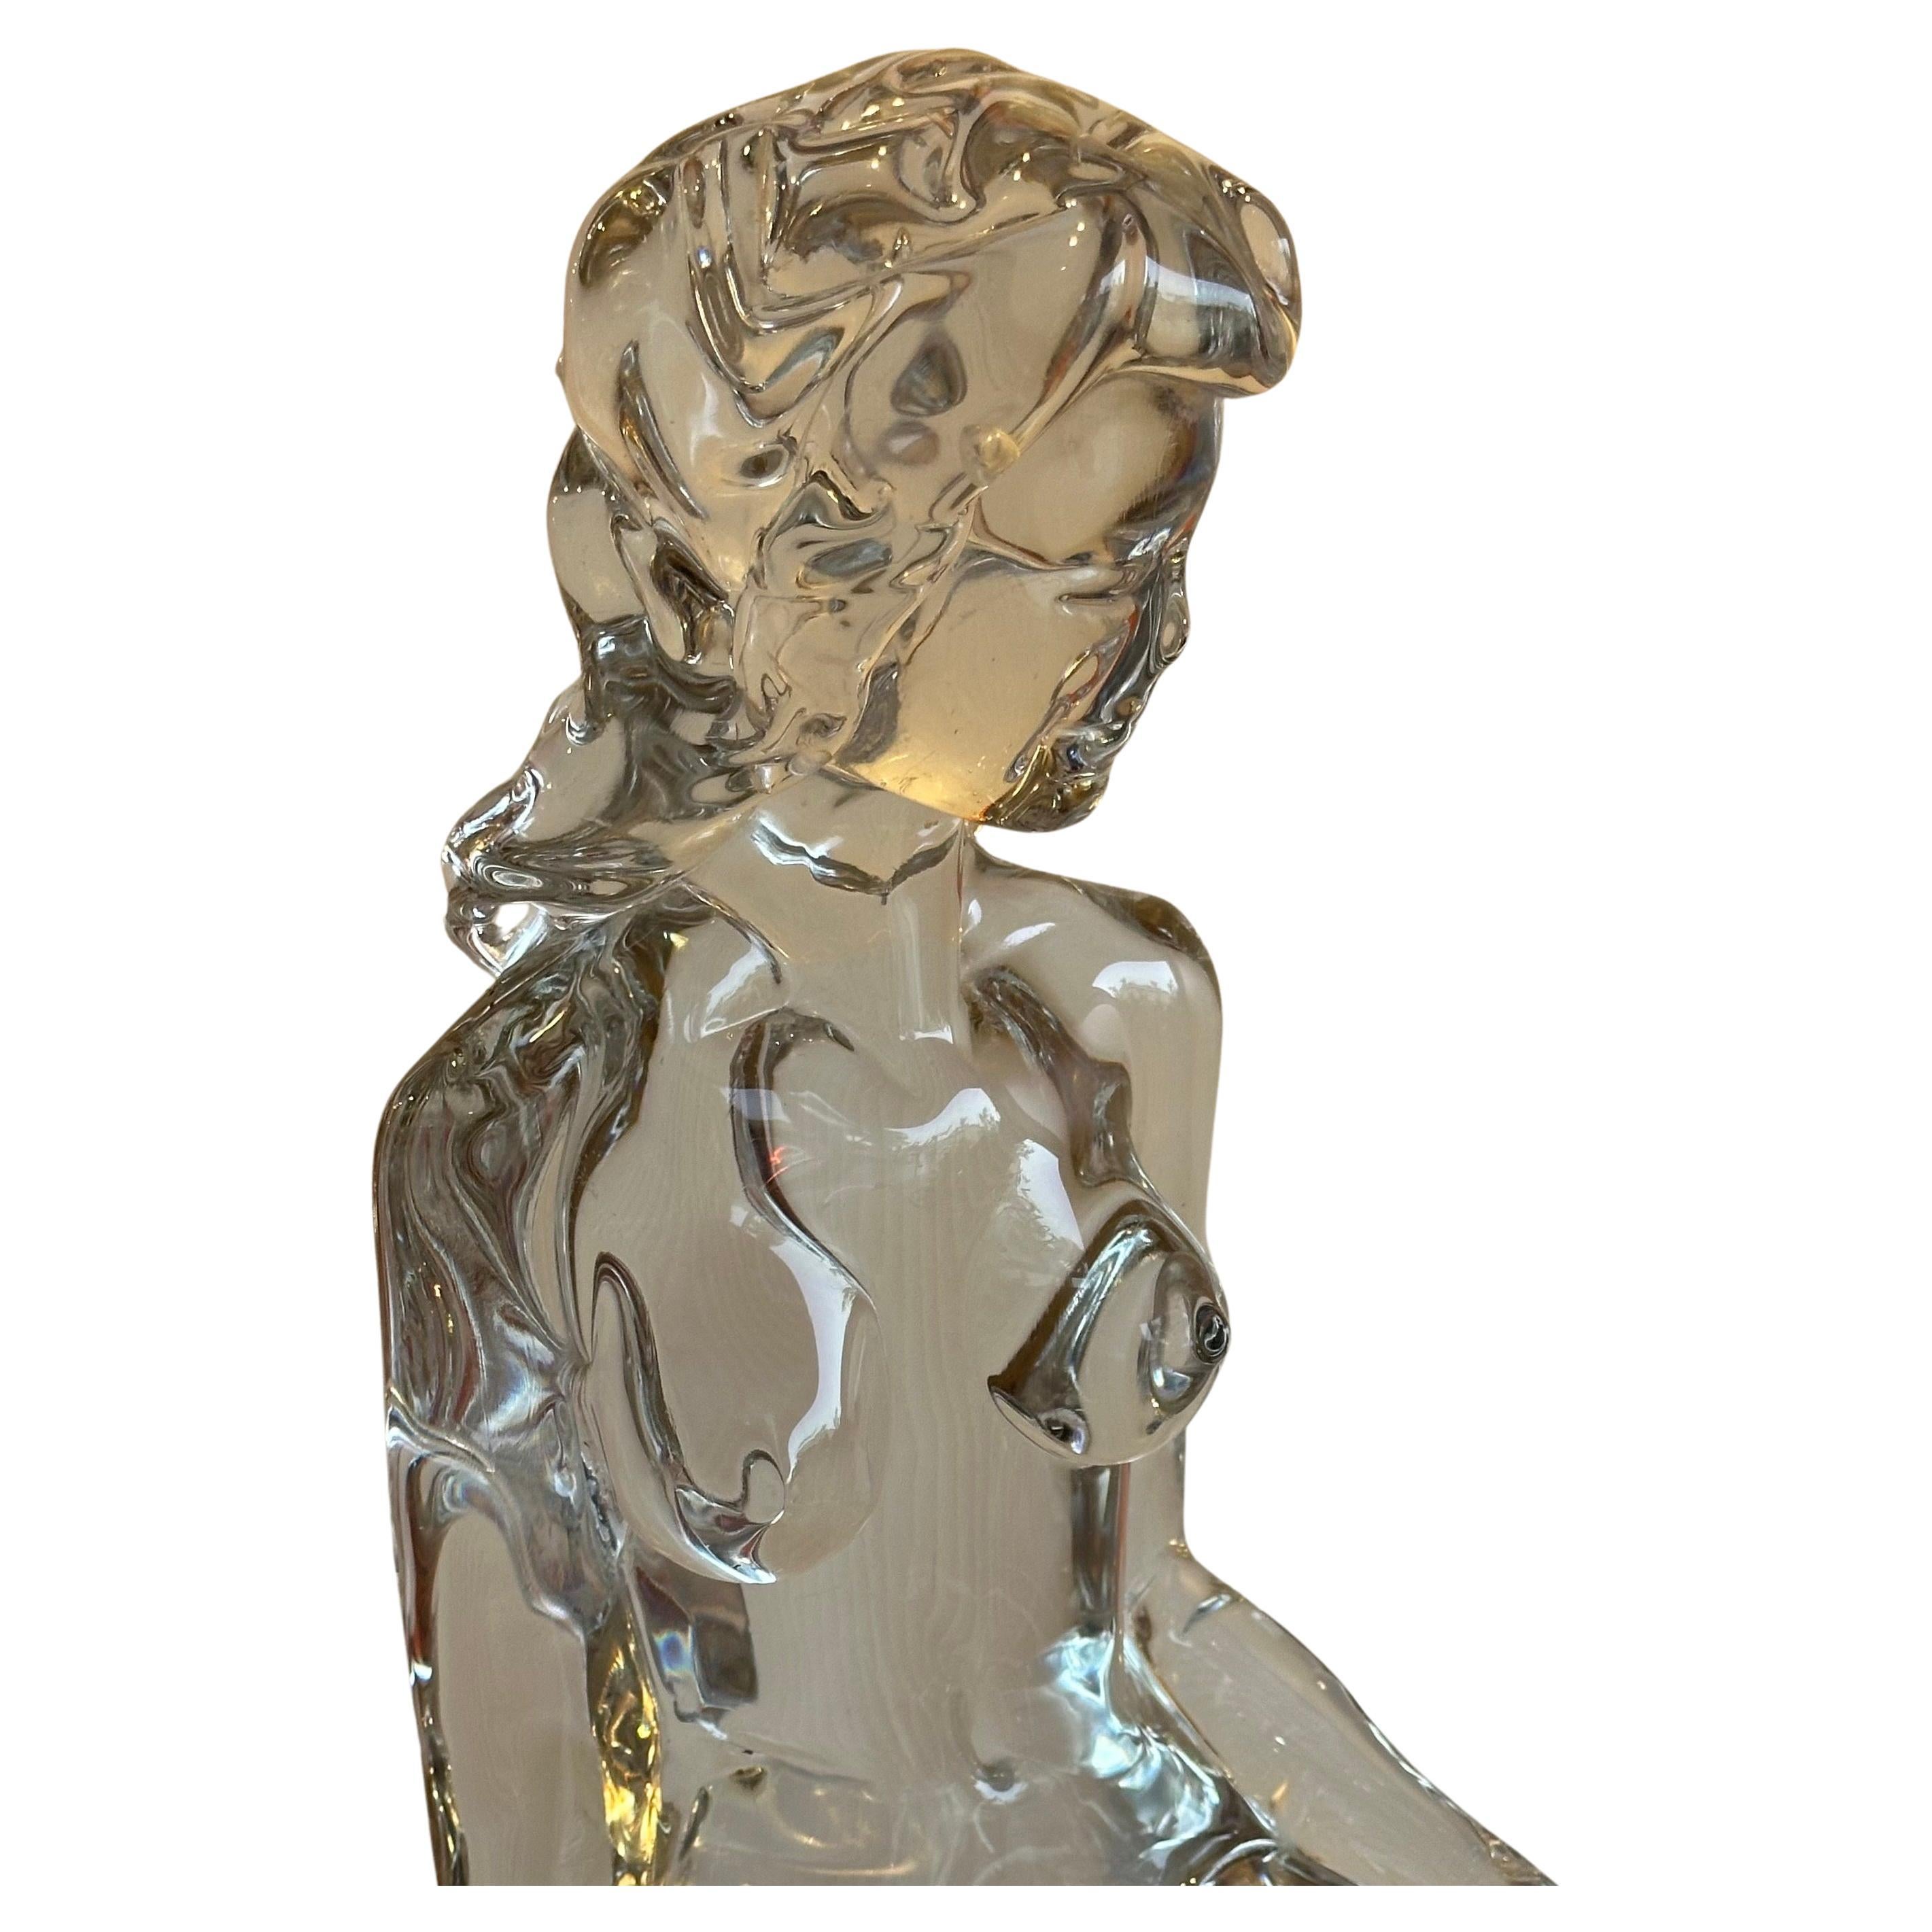 Massive nude art glass sculpture of a young woman by Loredano Rosin for Murano Glass, circa 1970s.  The sculpture is crafted in the unique style of Rosin and has exceptional detail.  The piece is in very good vintage condition with no chips or